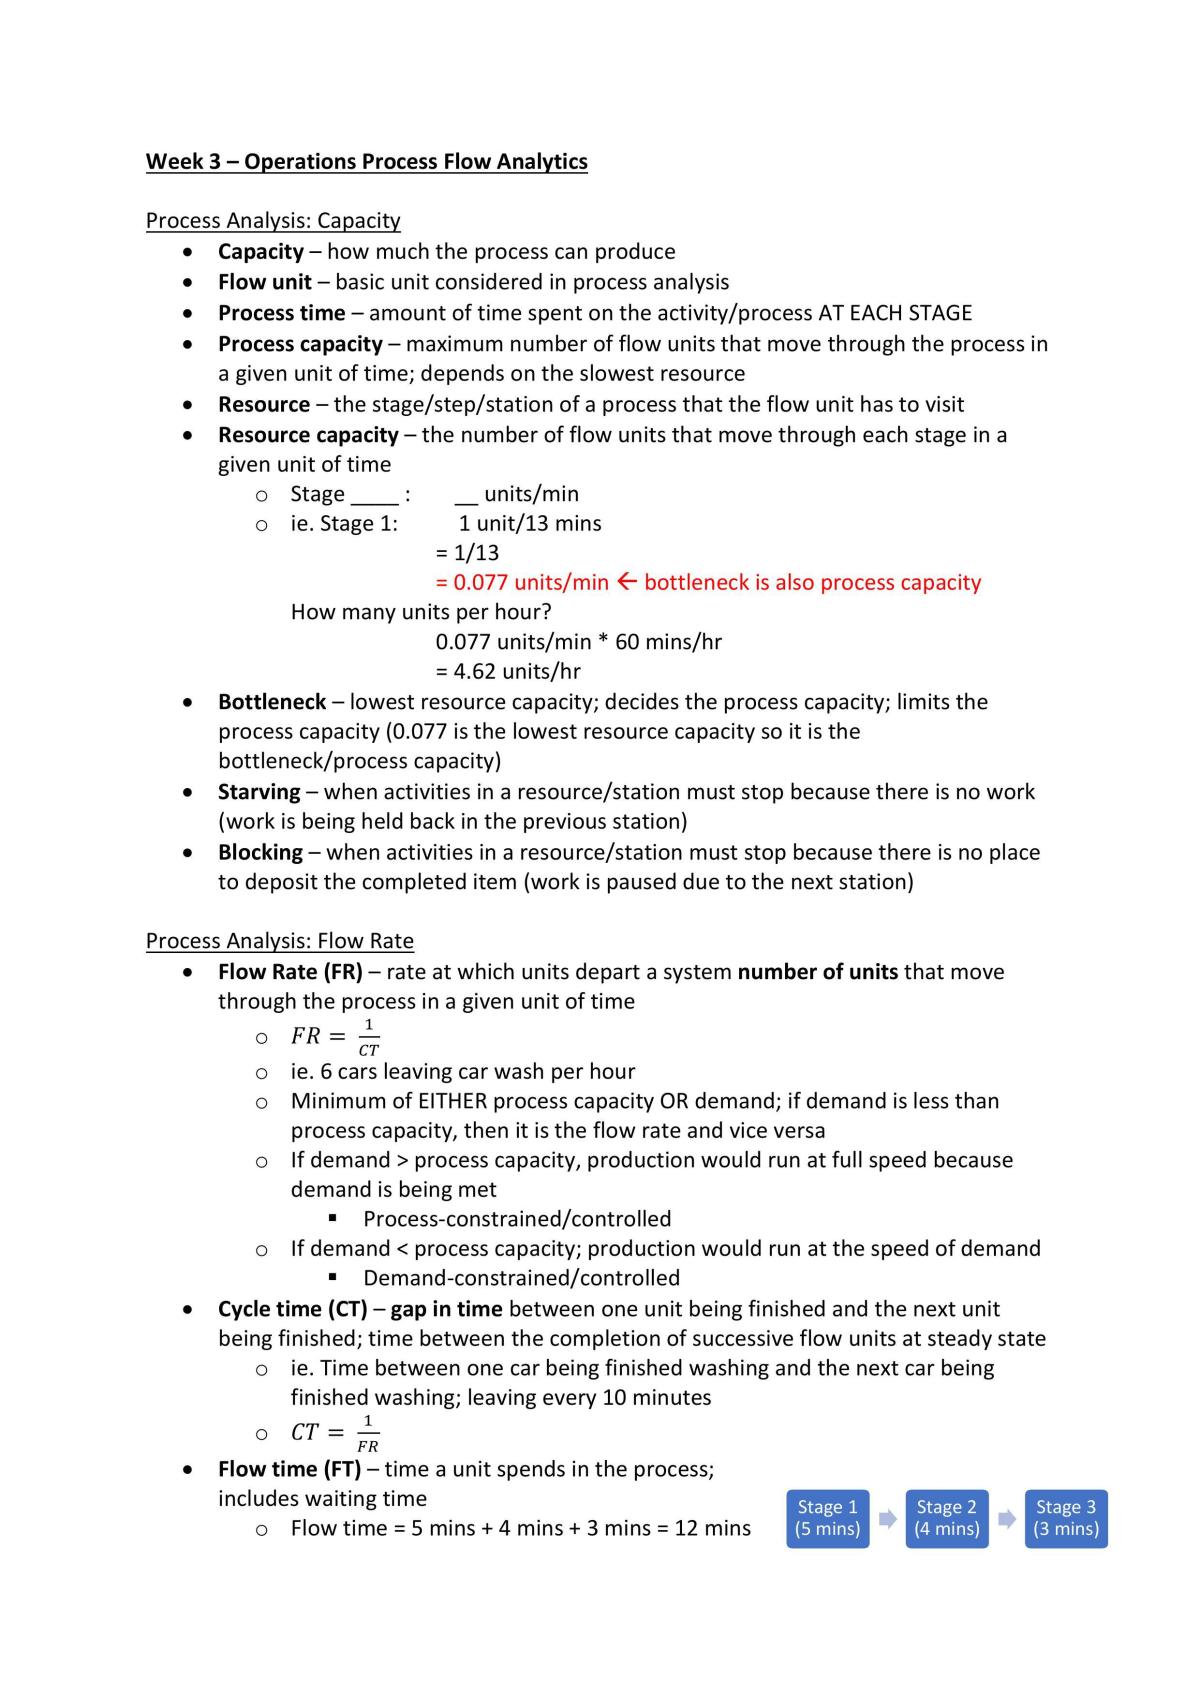 DAO2703 Complete Study Notes - Page 1